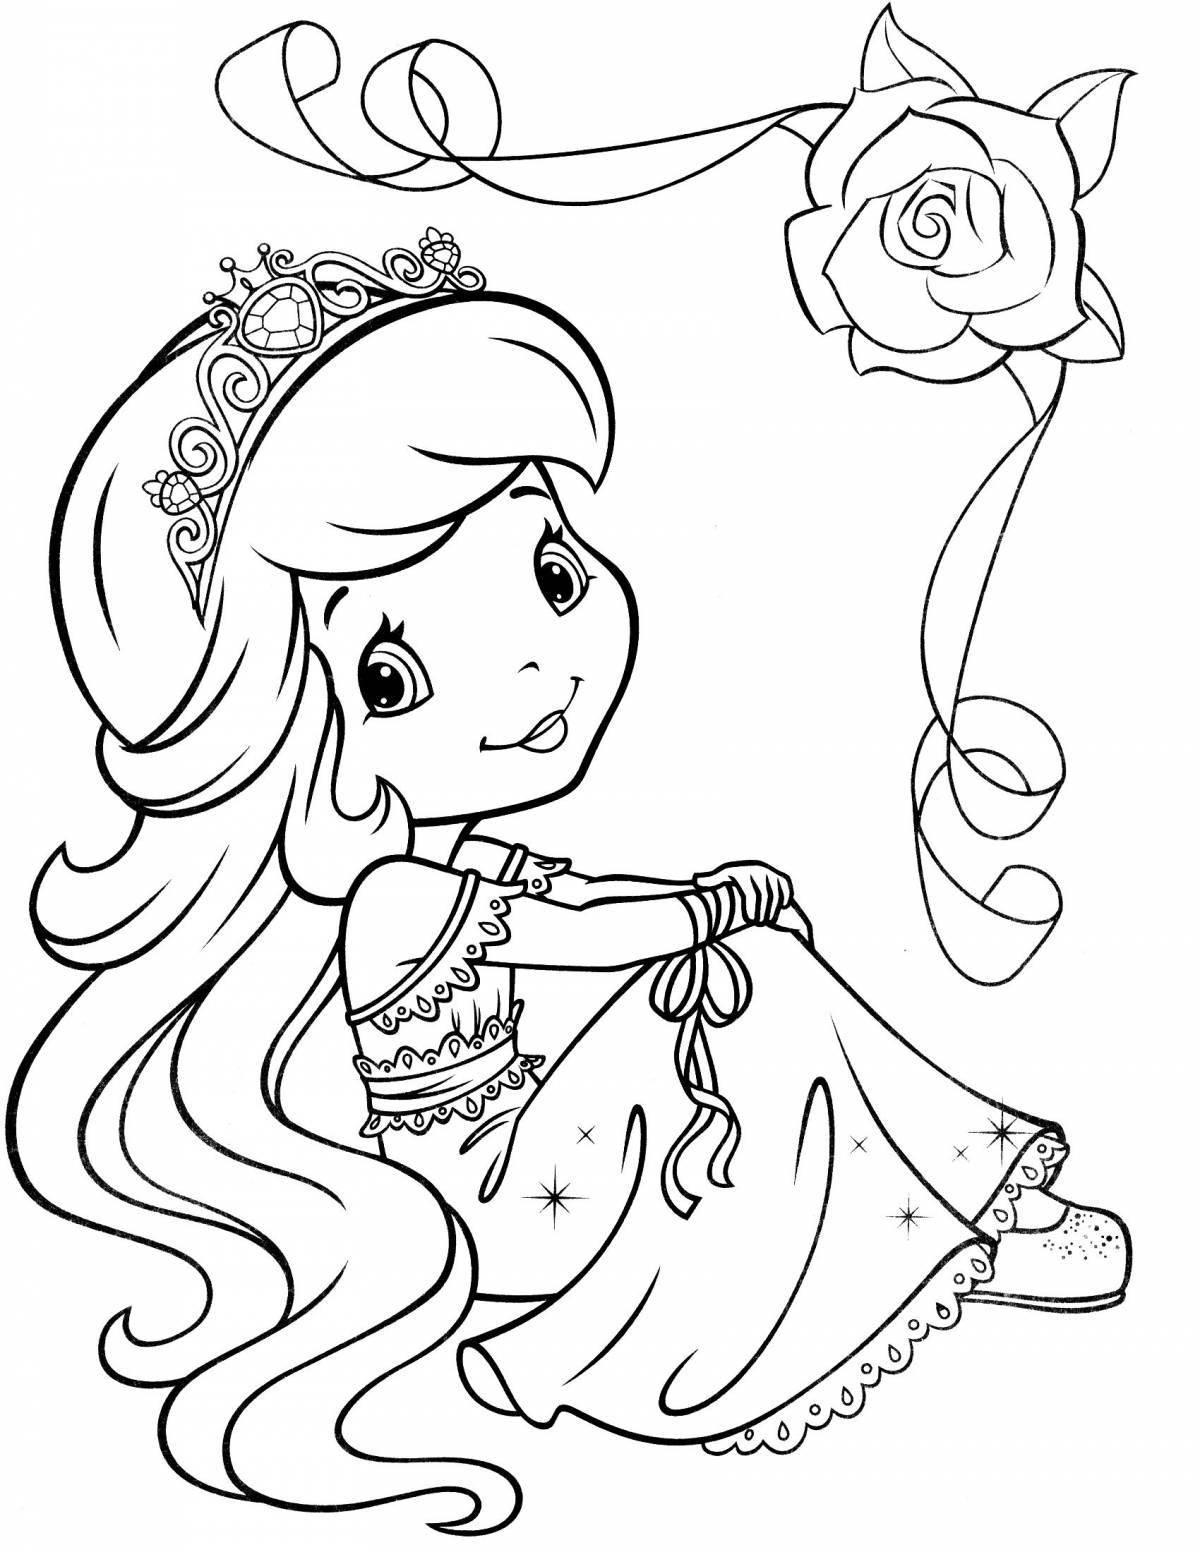 Fancy coloring for girls 5 years old